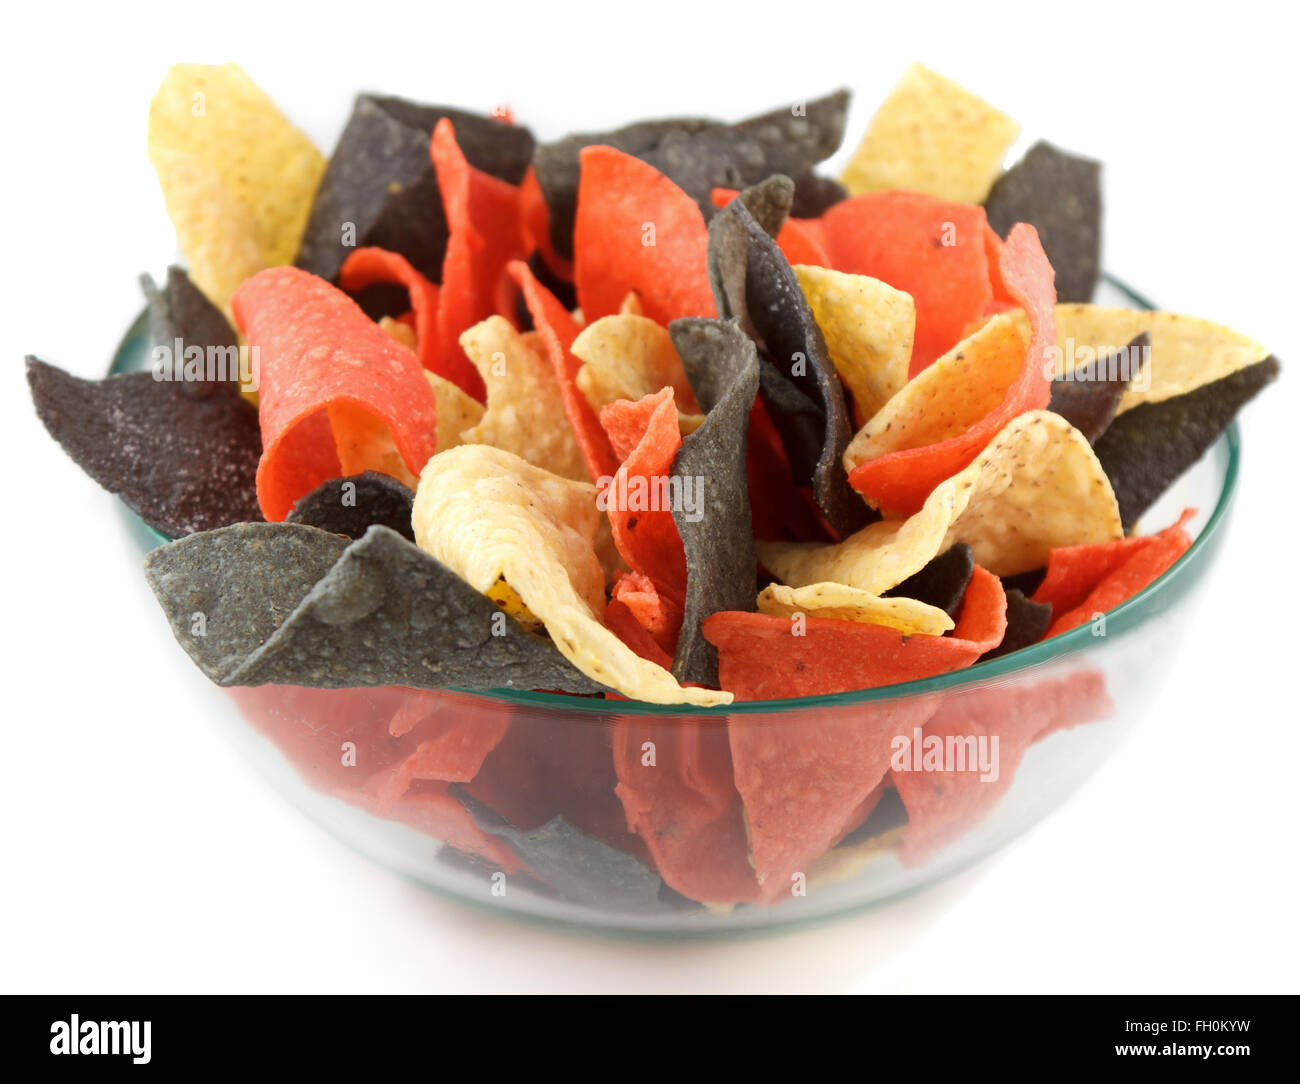 Bowl of mexican style nacho chips Stock Photo